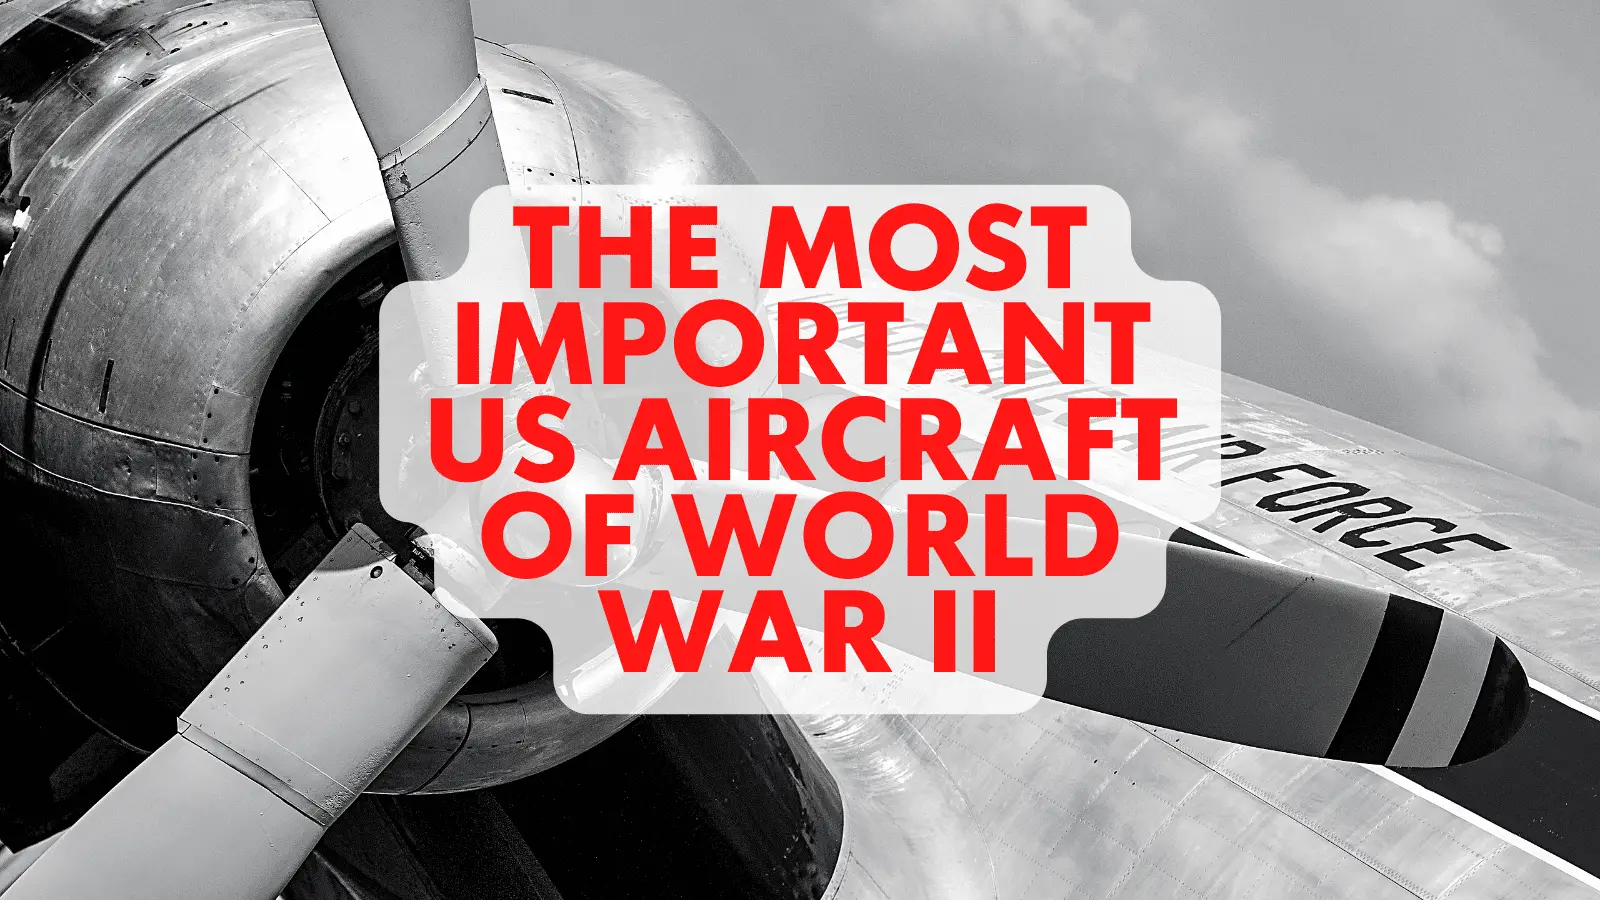 The Most Important US Aircraft of World War II